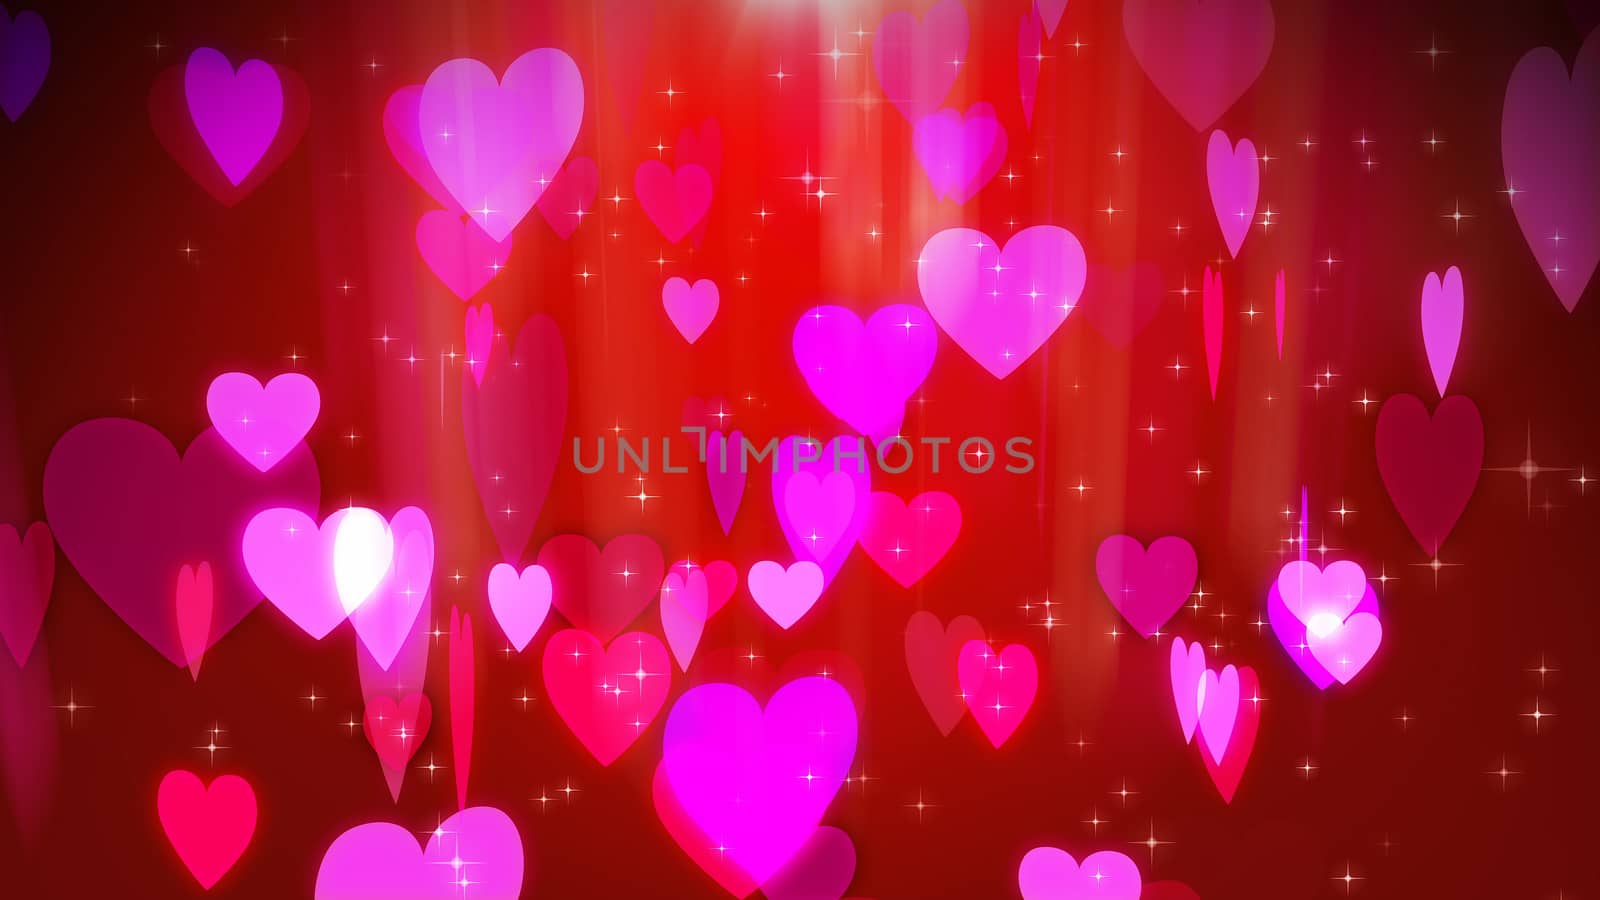 A beautiful 3d illustration of romantic rosy hearts flying in the air. They look amorous like hearts of beloved couples in the red and purple background. Saint Valentine will be soon!